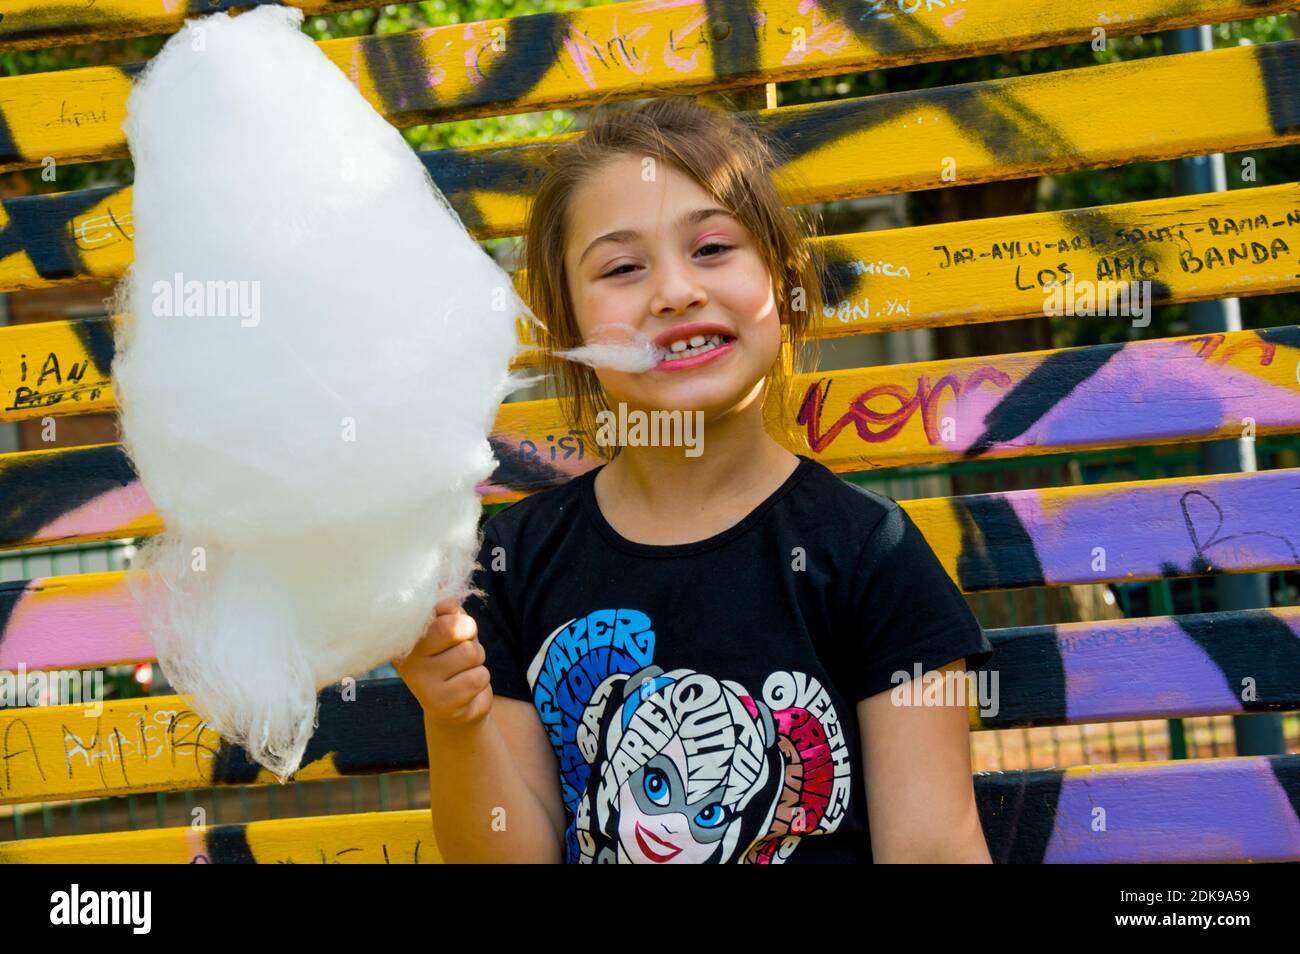 Portrait Of Girl Eating Cotton Candy While Standing Outdoors Stock Photo